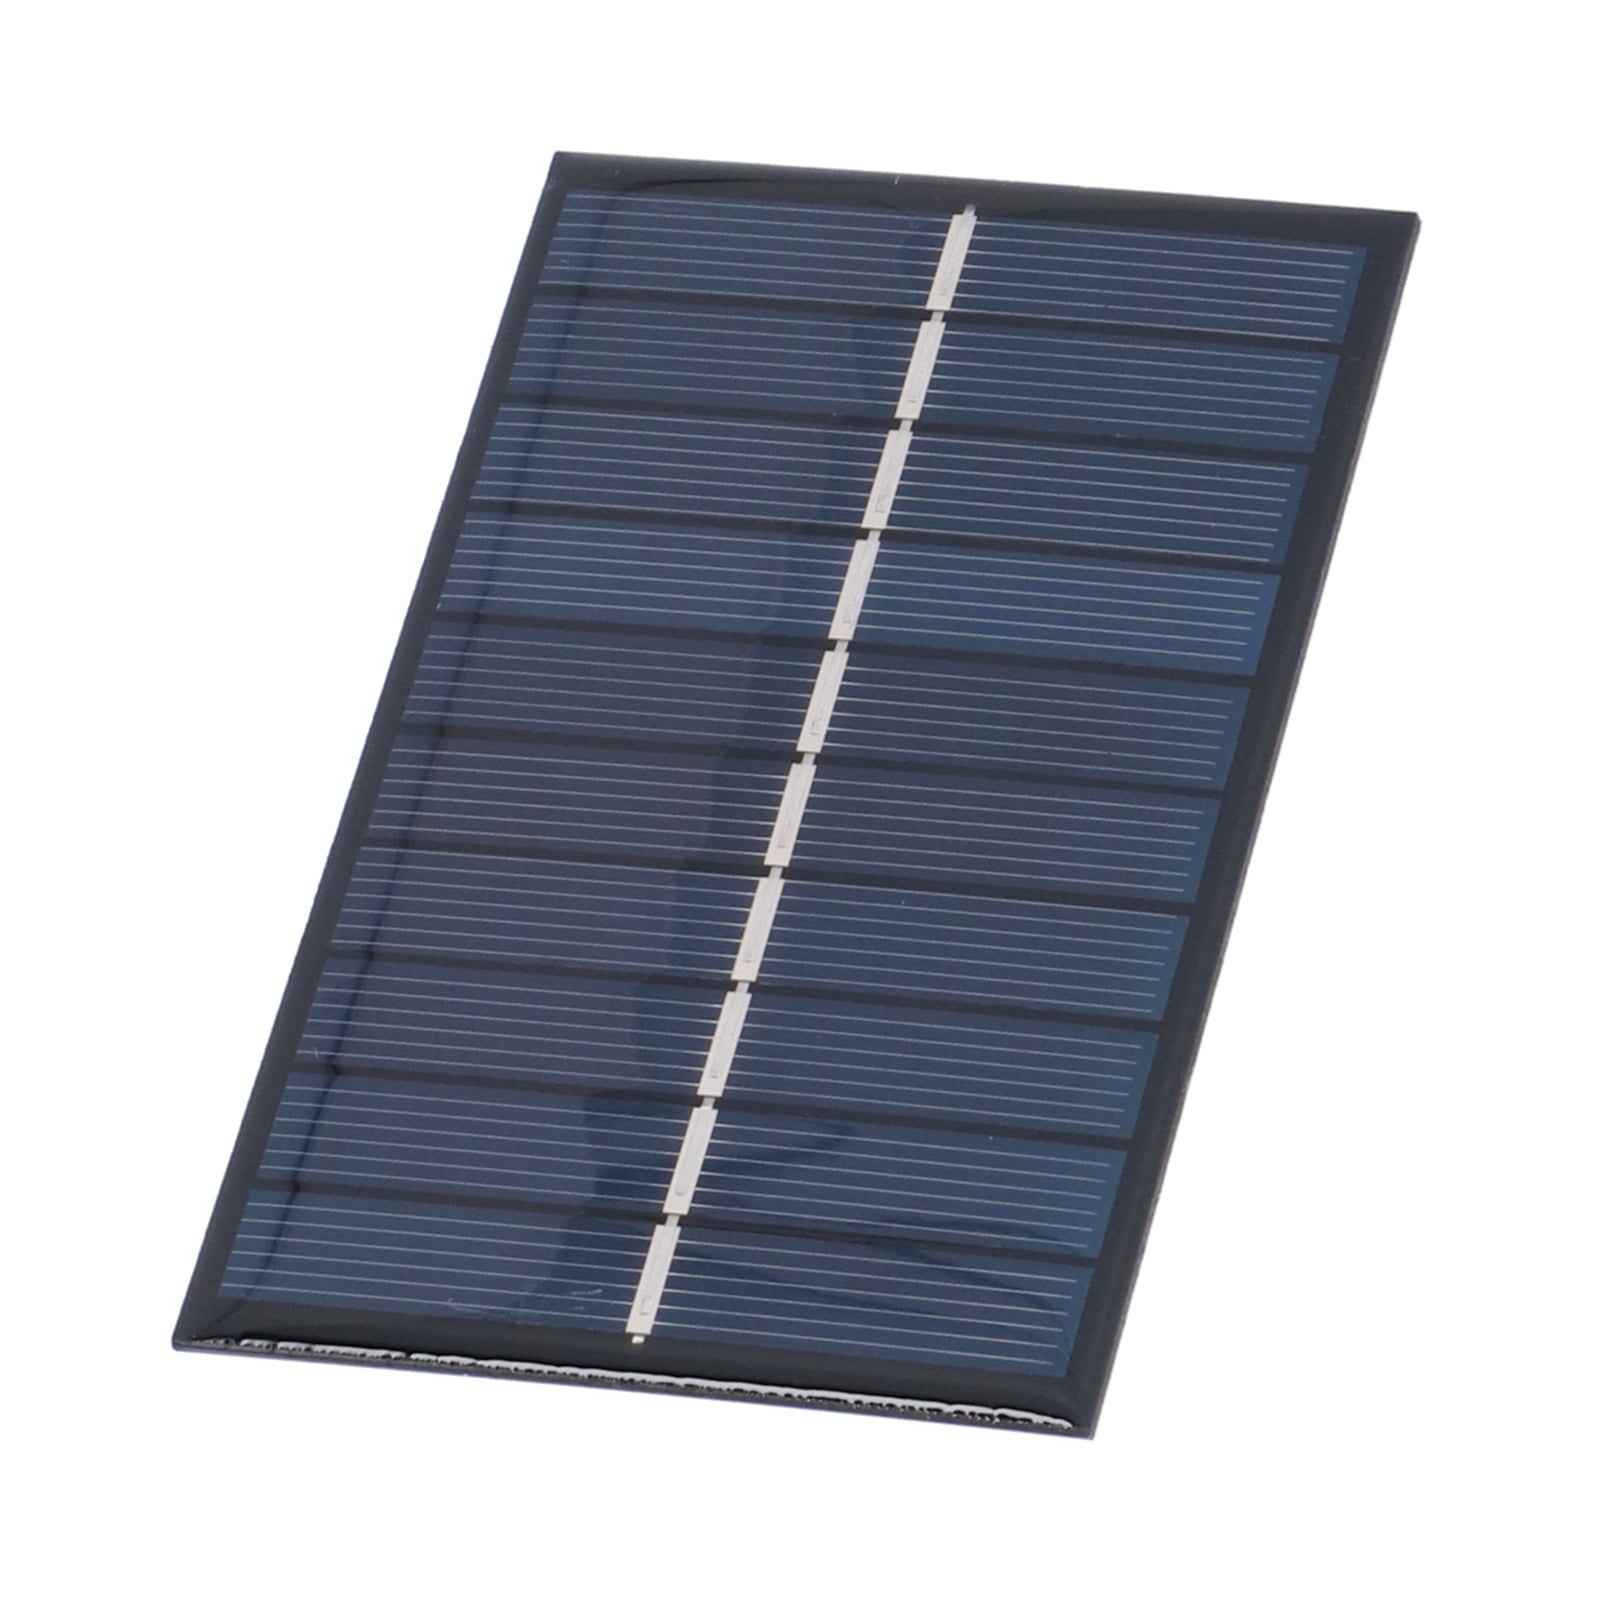 Micro Power Solar Cell Solar Panel DIY Projects Solar Toys Powered Charger 